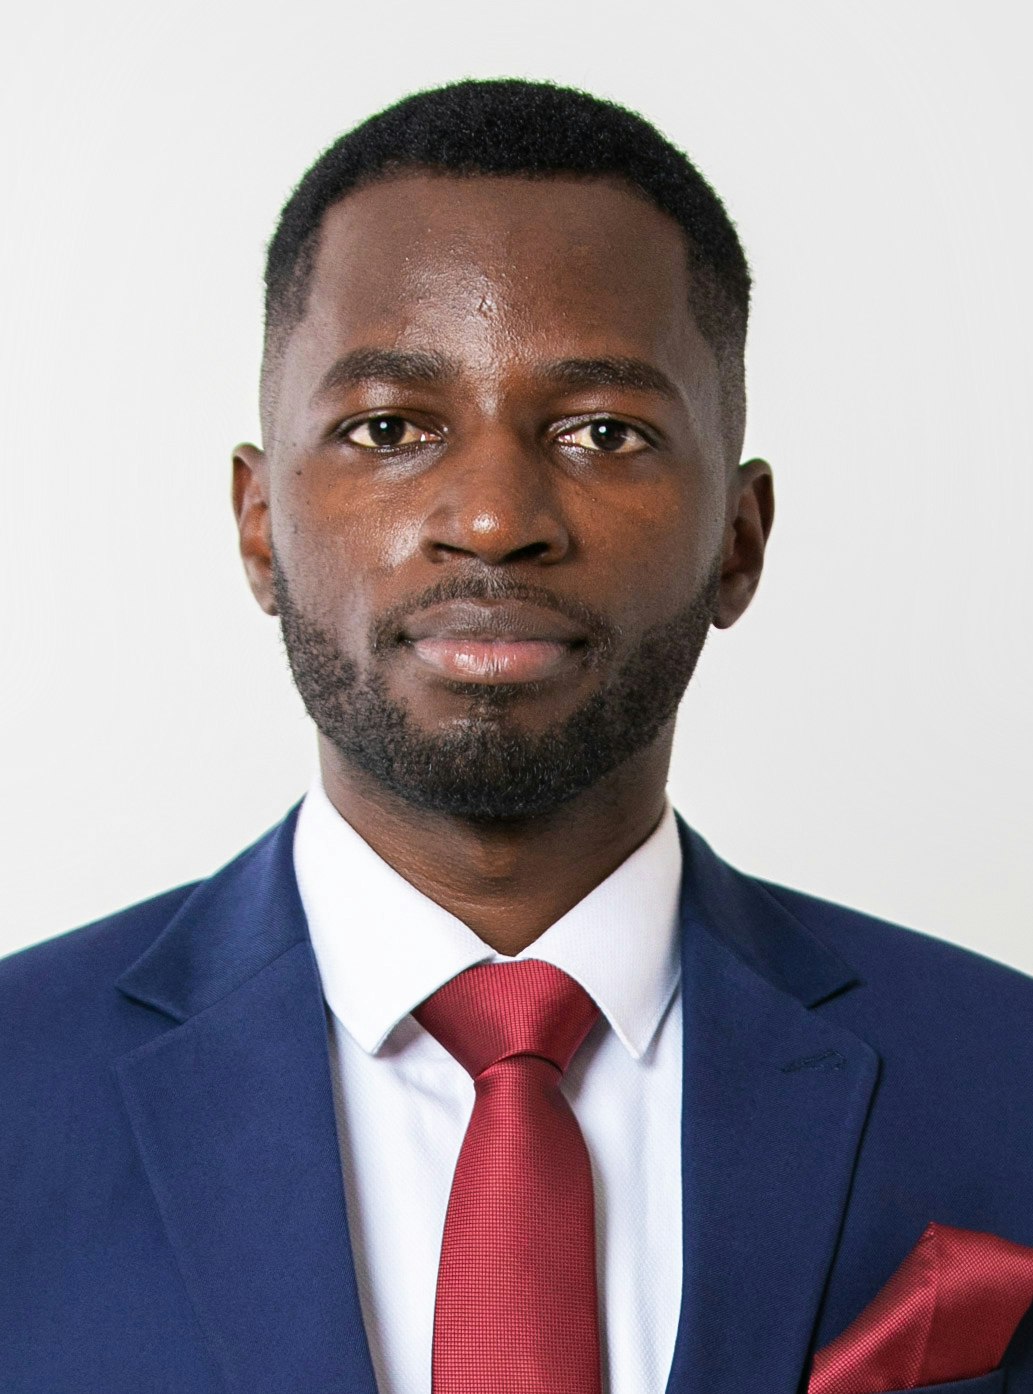 Daniel Mukisa, the cofounder and CEO of Ridelink, a logistics provider for small and medium enterprises (SMEs), based in Uganda.